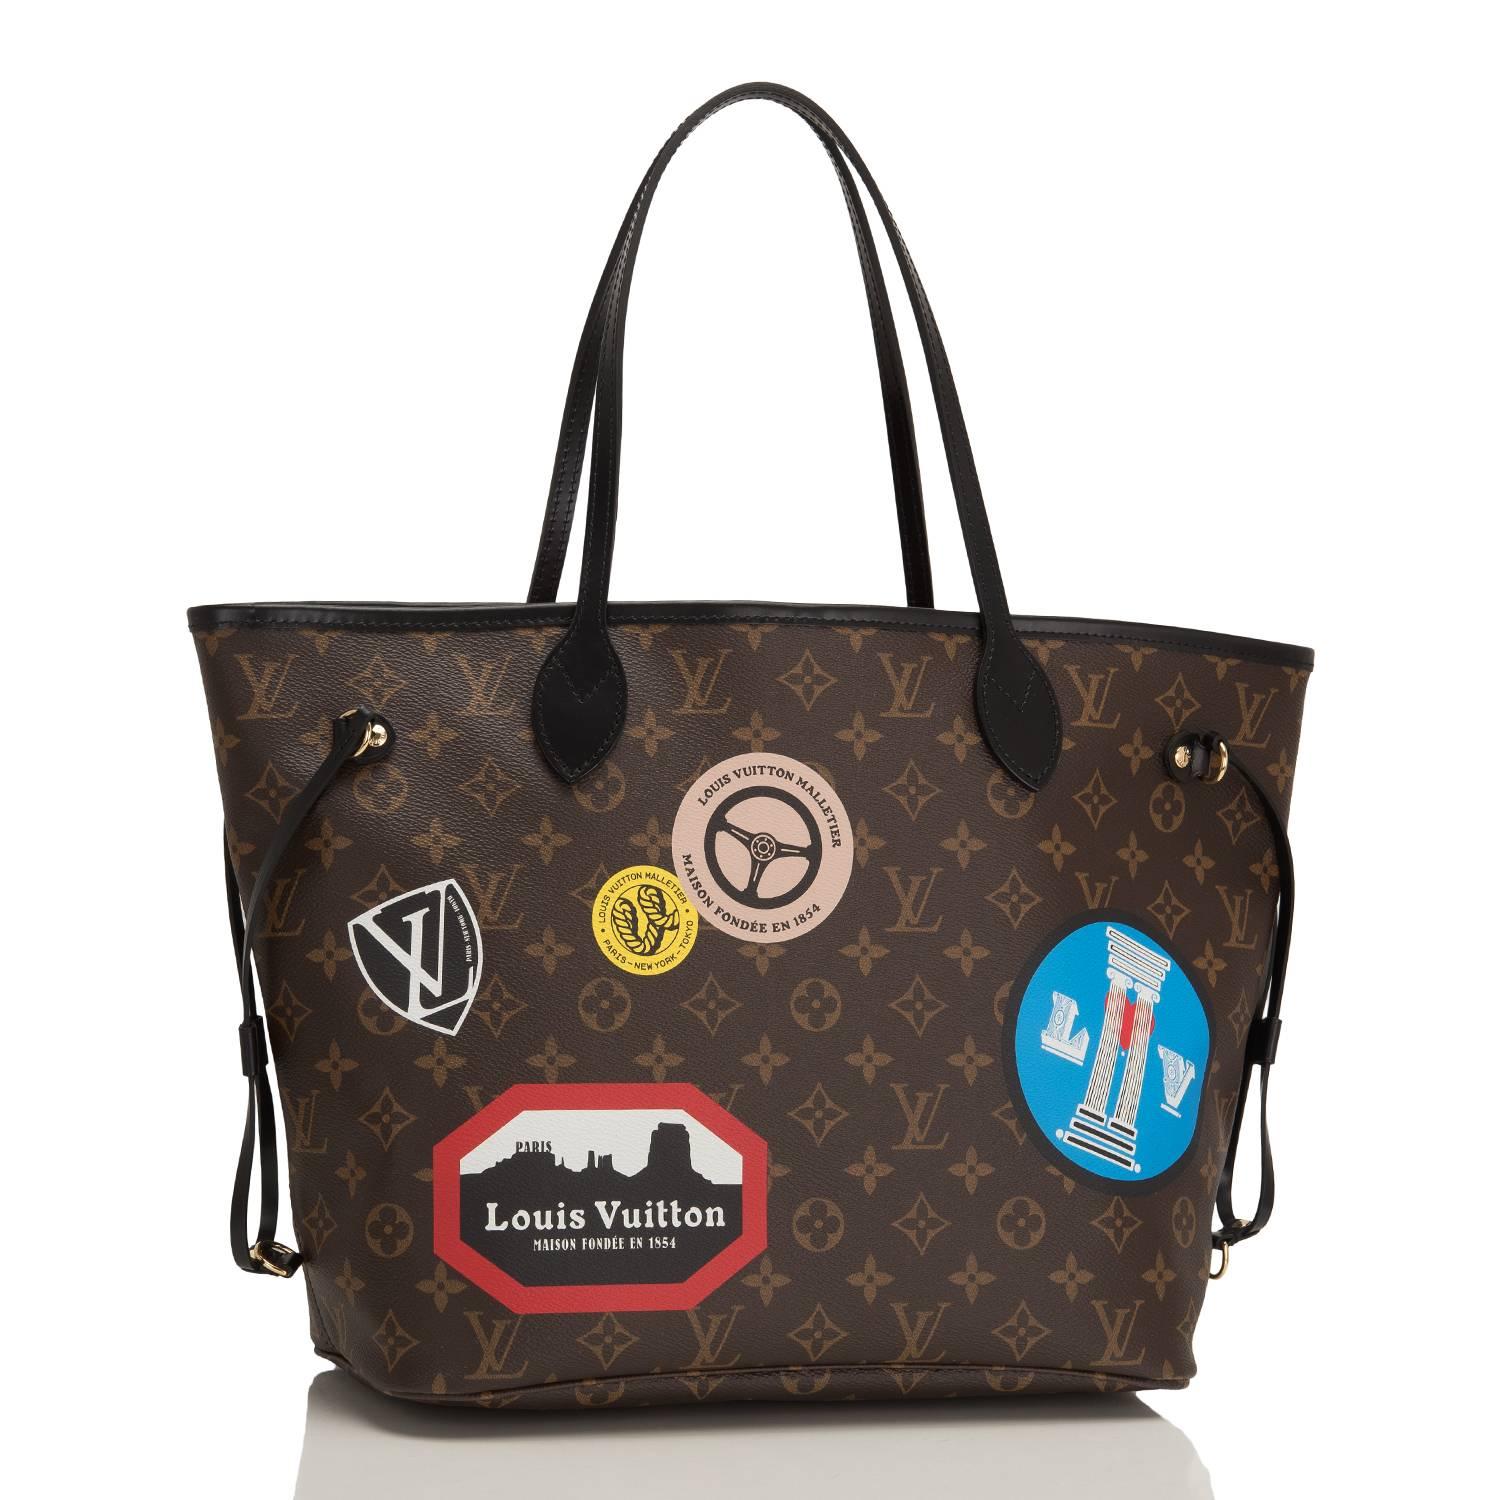 Louis Vuitton Monogram "World Tour" Neverfull MM tote of coated canvas with black leather trim, polished brass hardware and removable pouch.

This limited edition tote features printed stamps over the traditional monogram canvas, black